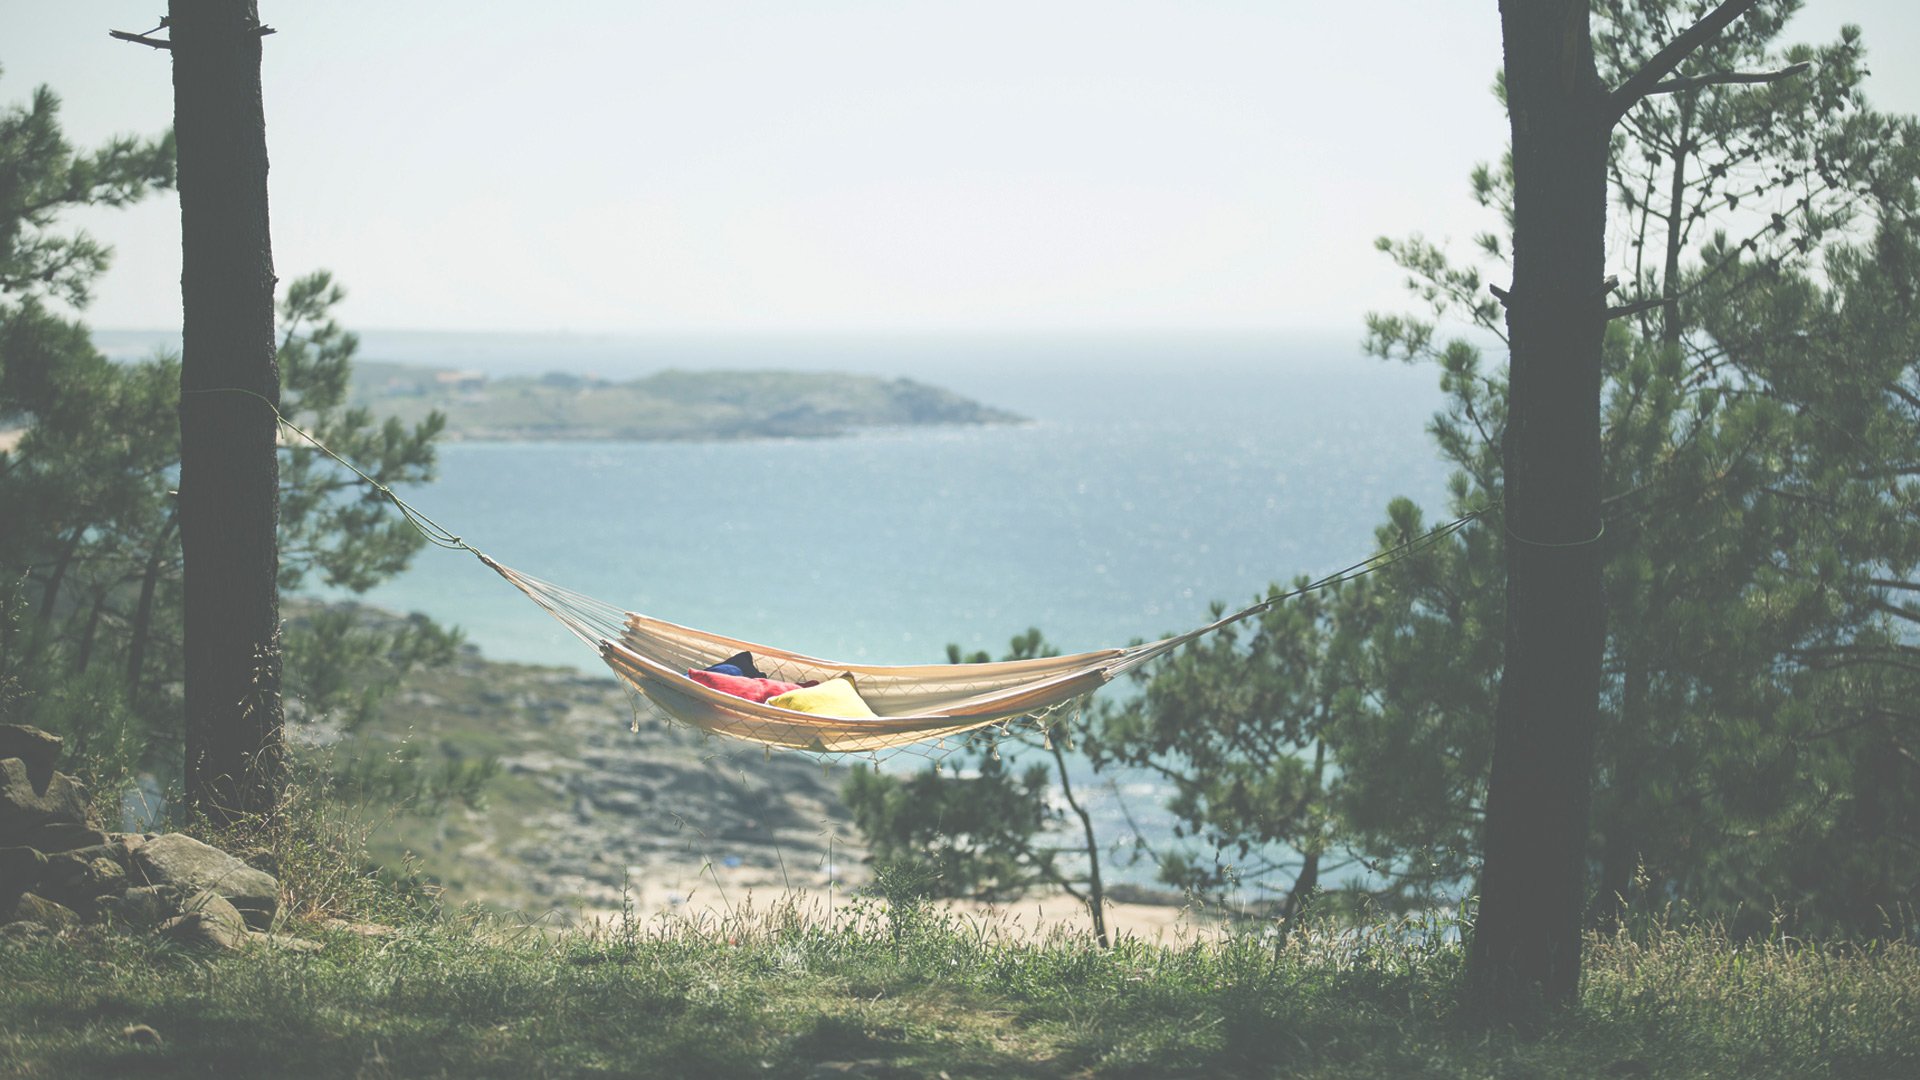 Hammock hanging by the beach | Beauty of Life in the Slow Lane